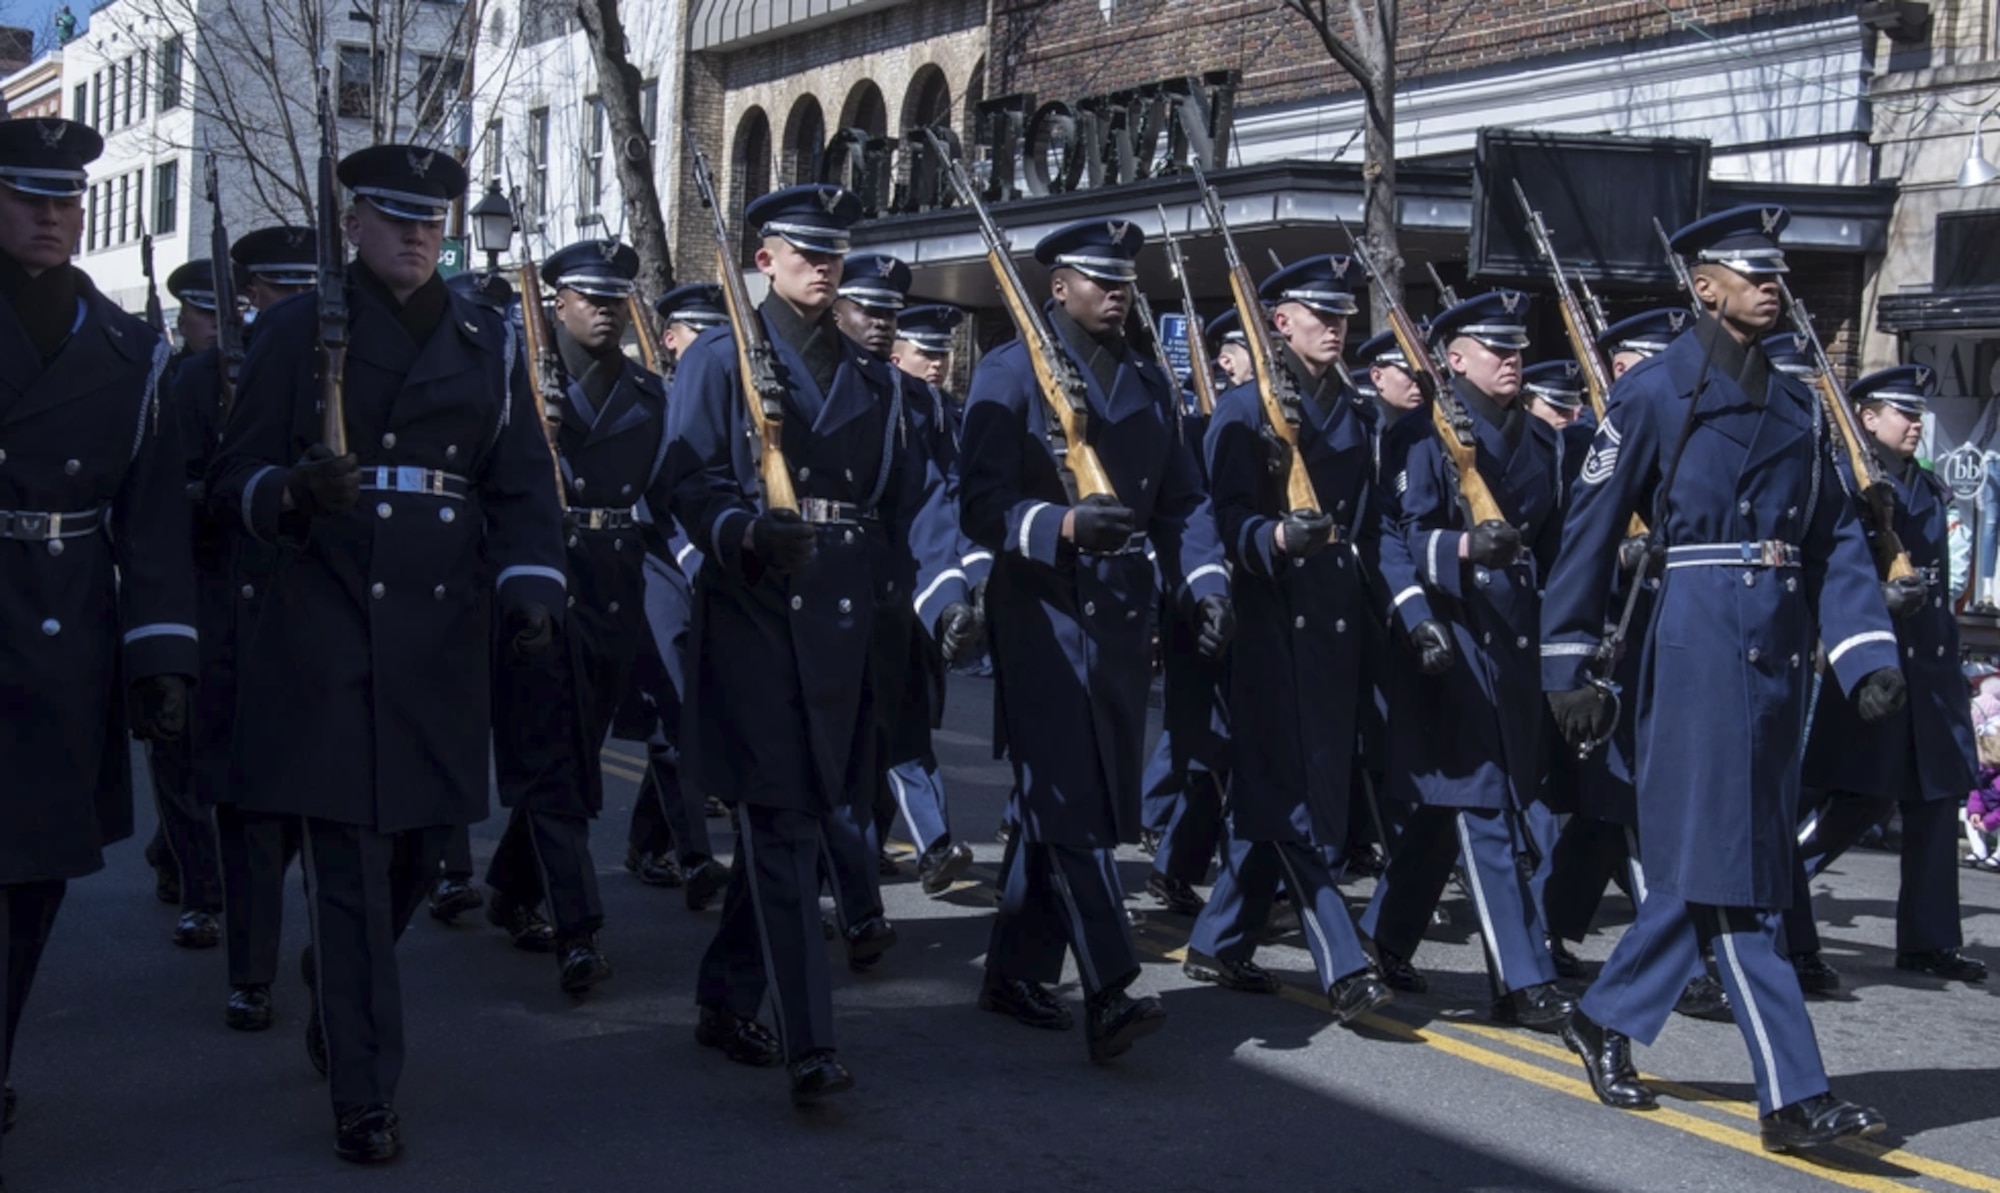 Then-Senior Master Sgt. Robert B. Jones leads the Air Force Honor Guard formation at the Joint Service St. Patrick's Day parade in Arlington, Virginia, in 2017. (U.S. Air Force photo)